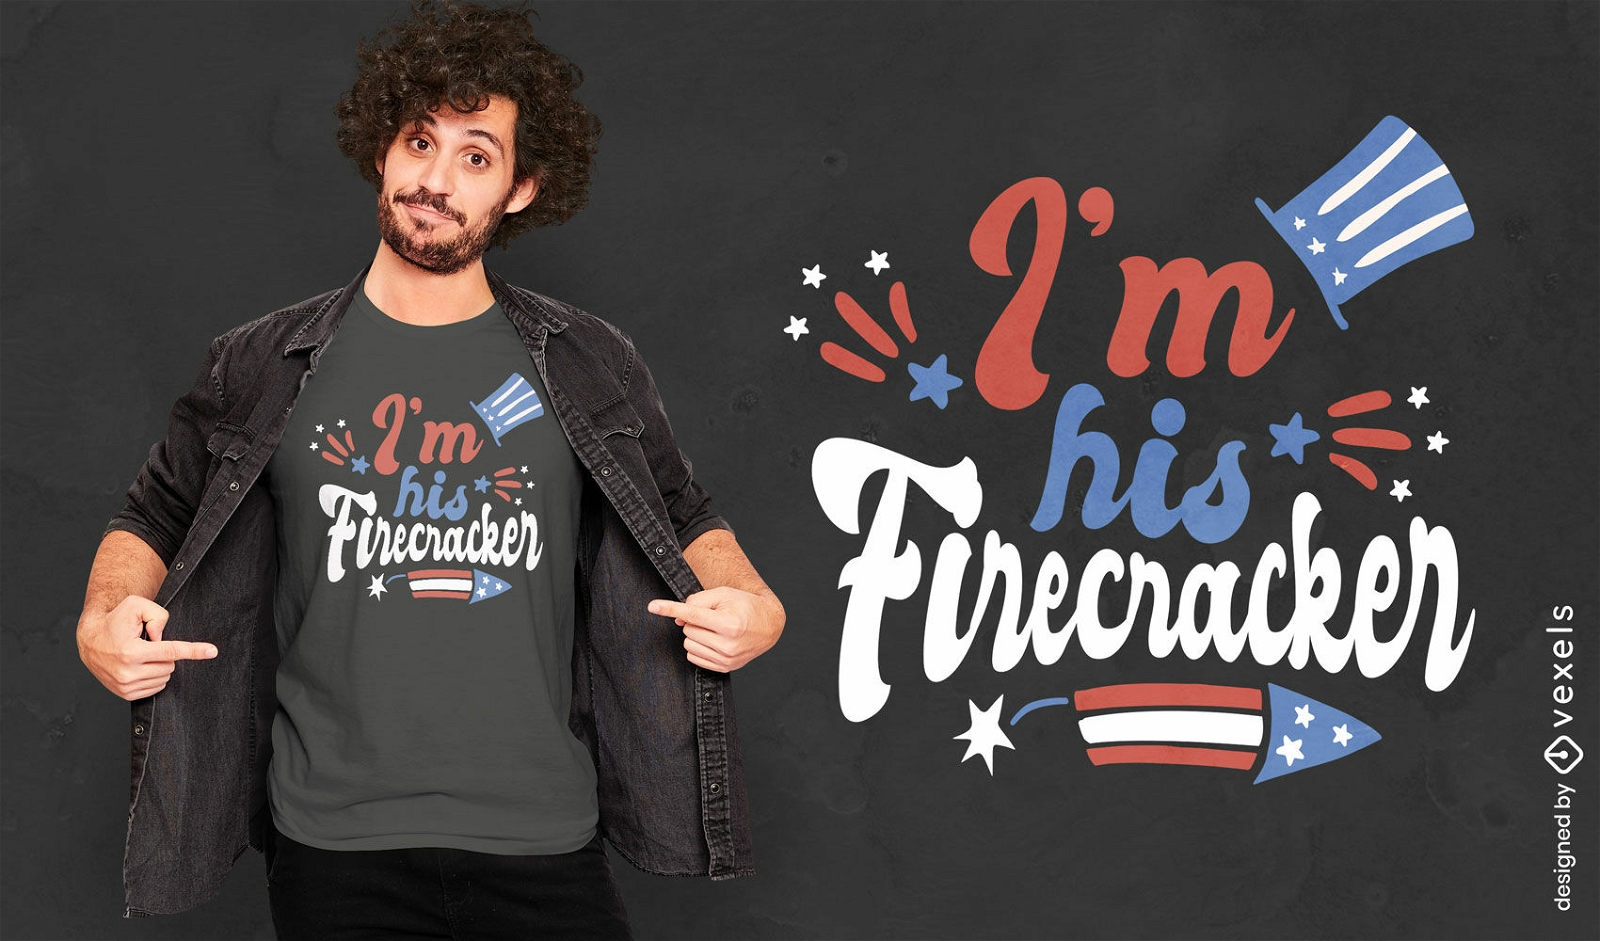 His firecracker holiday quote t-shirt design